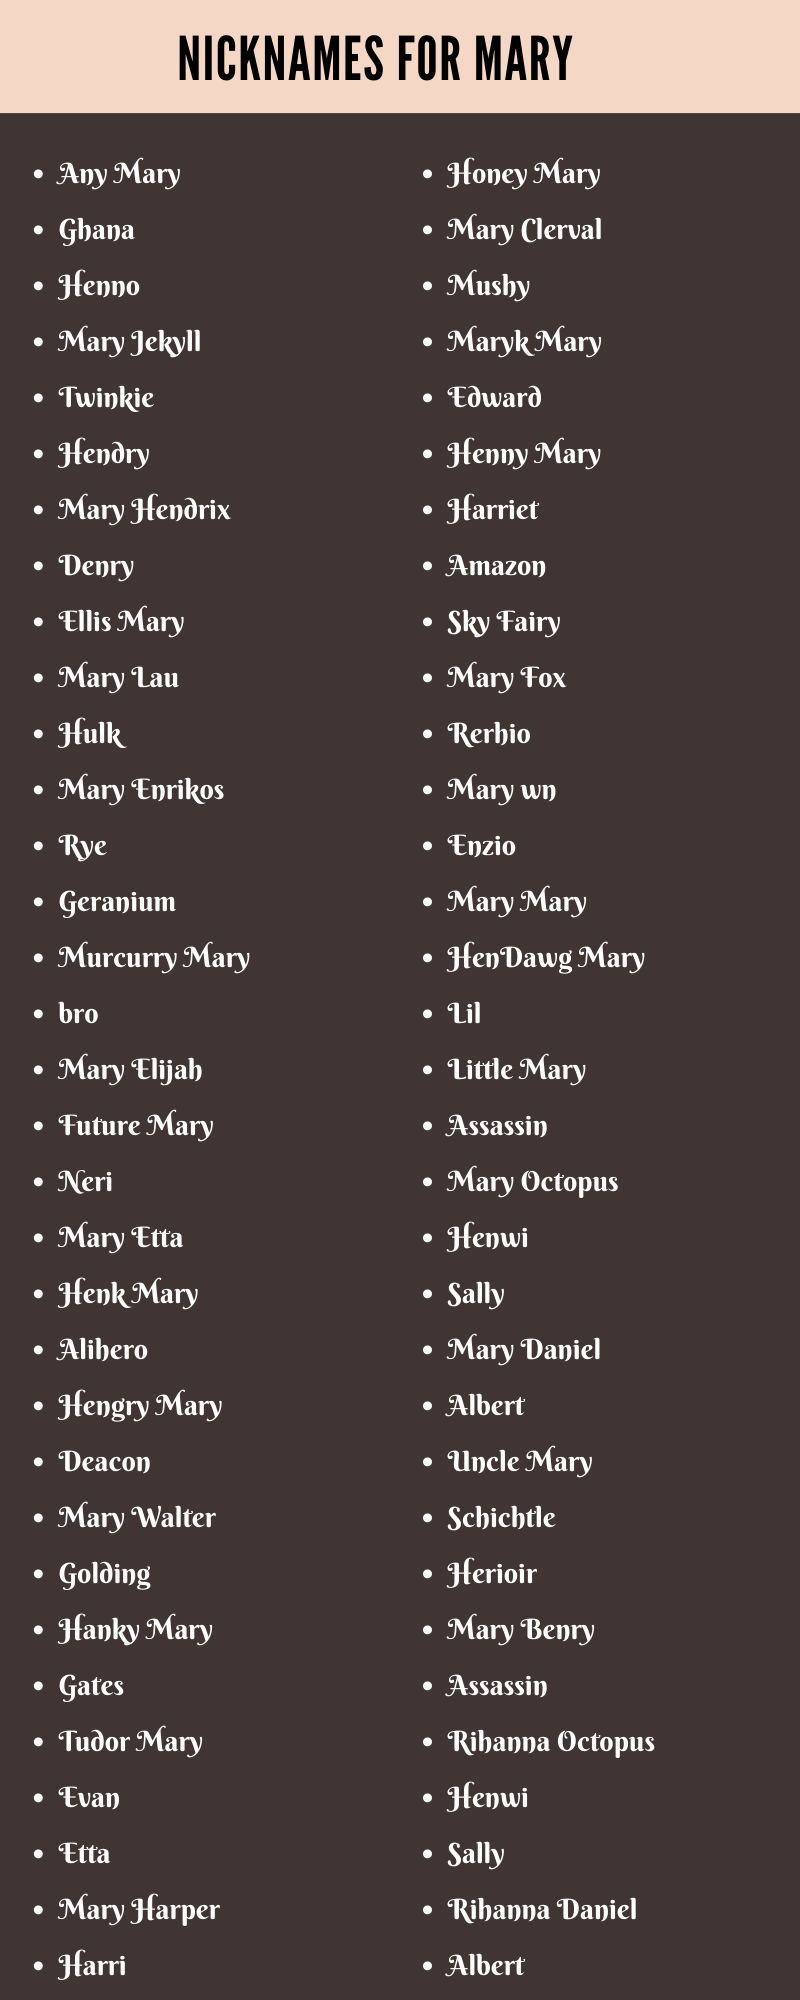 Nicknames for Mary